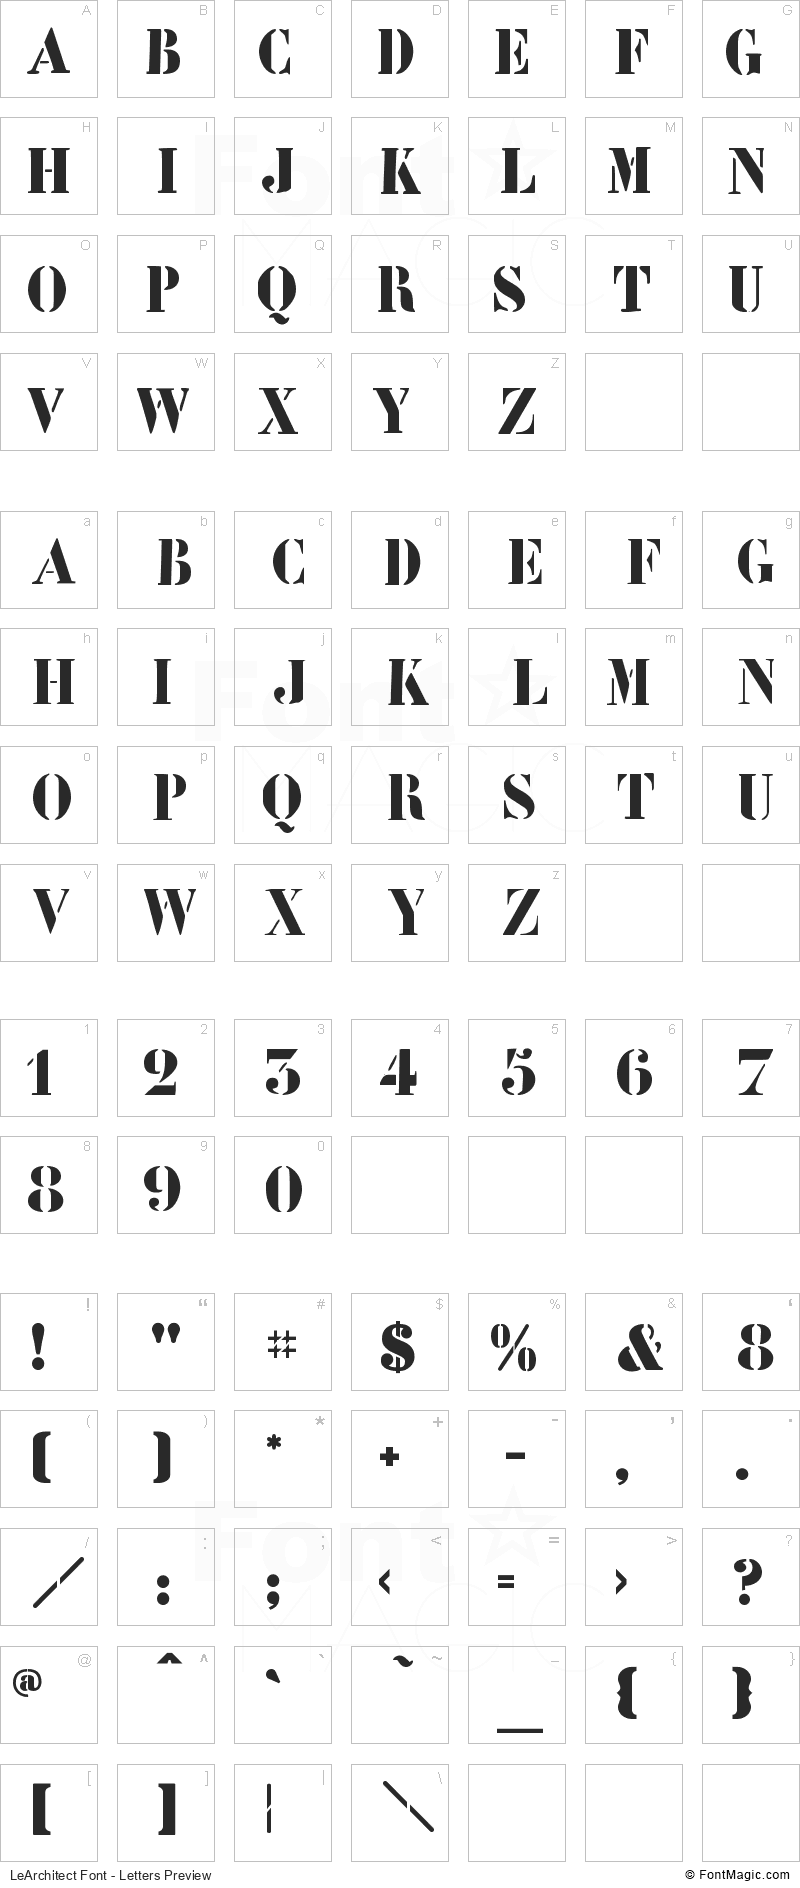 LeArchitect Font - All Latters Preview Chart